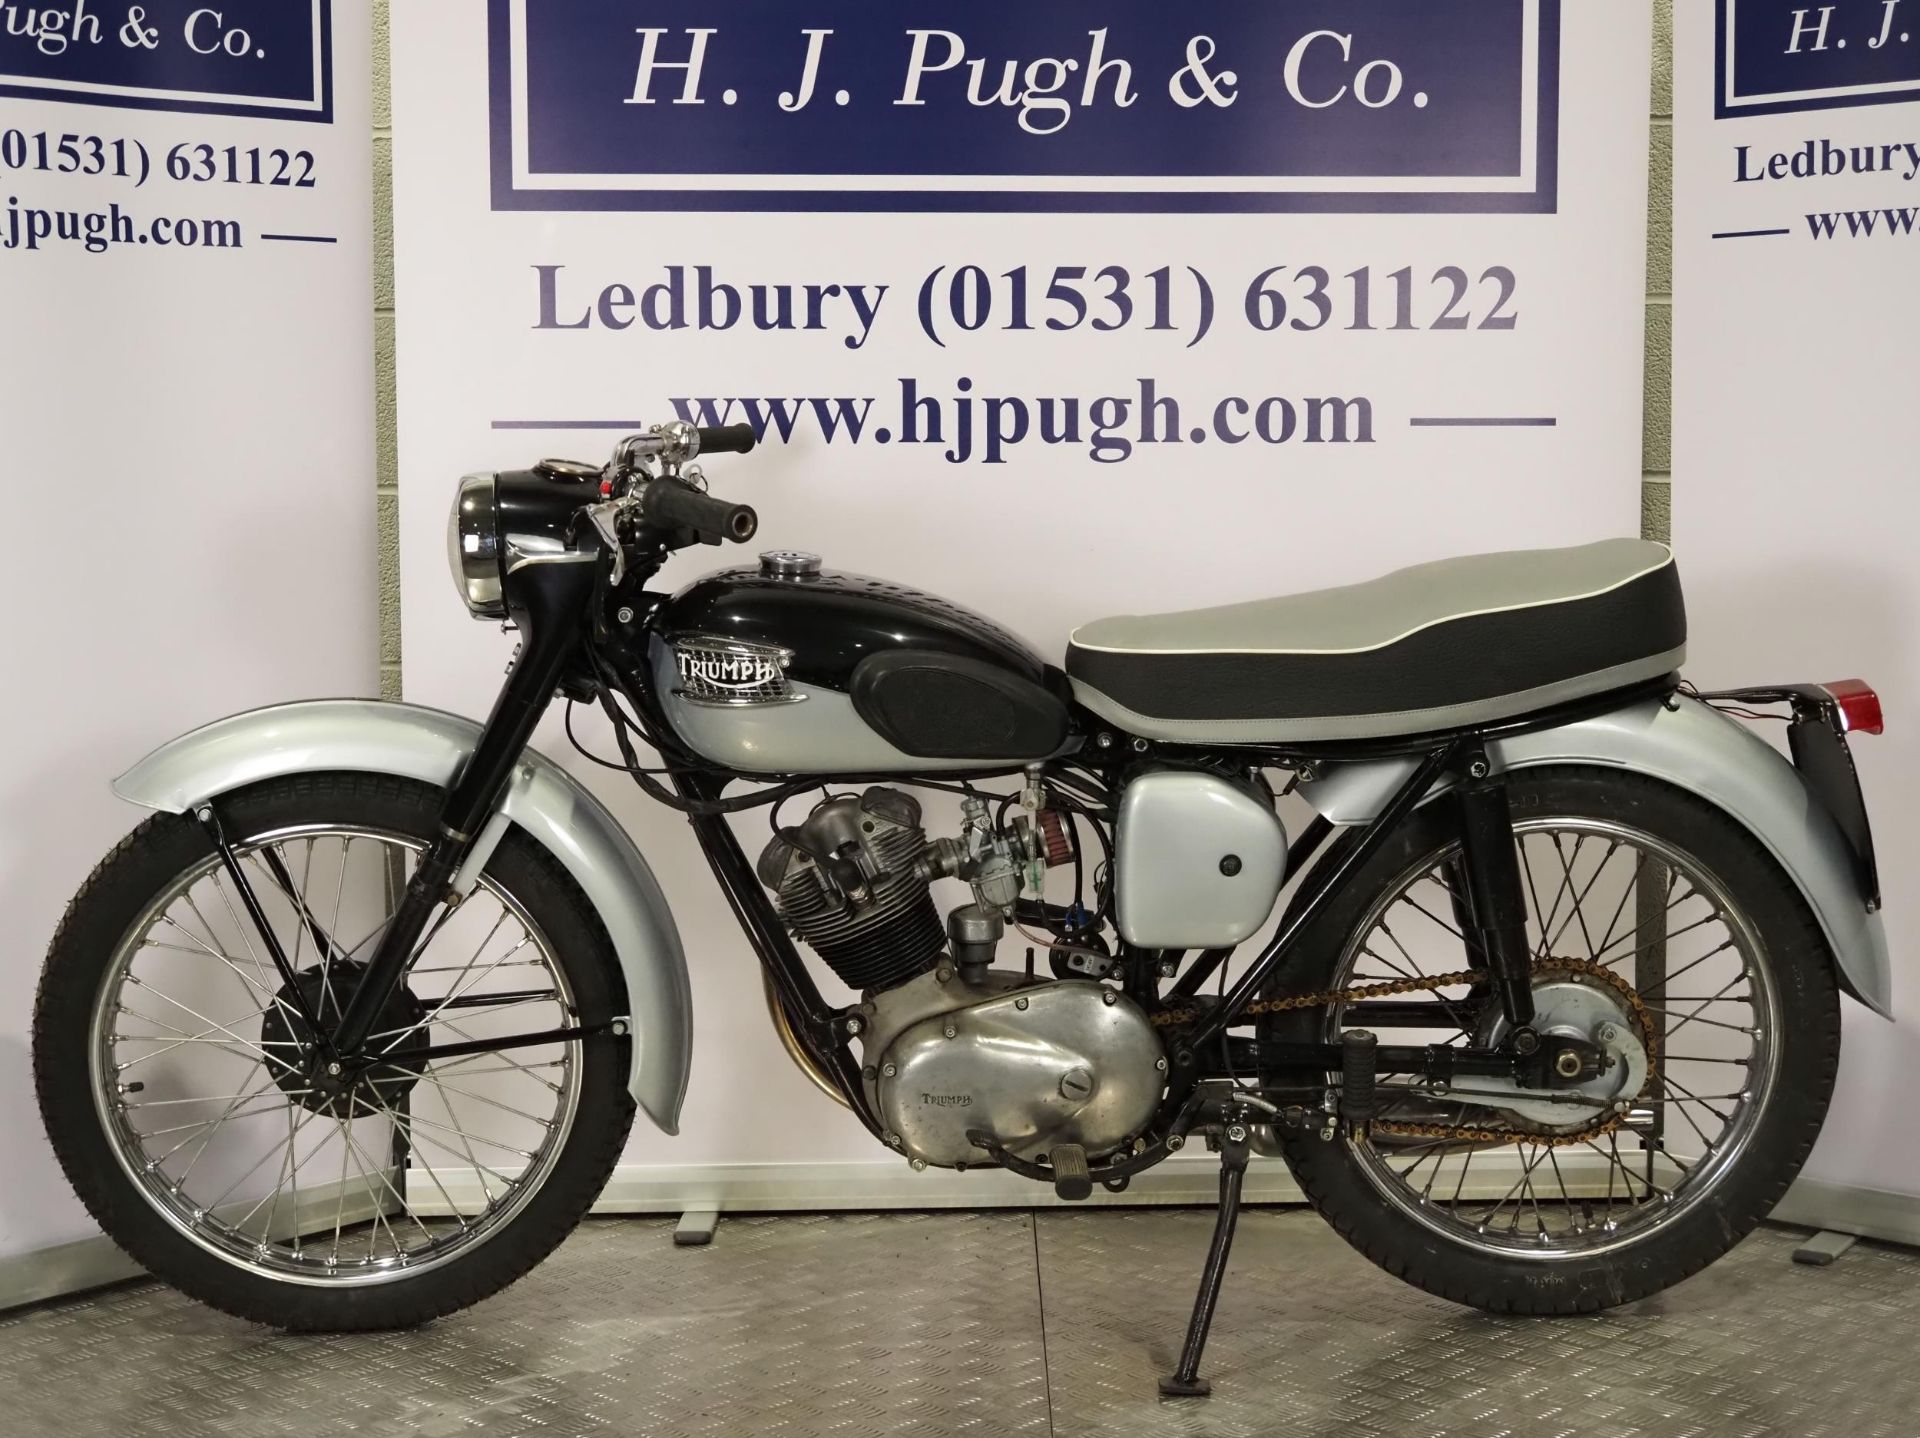 Triumph Tiger Cub motorcycle. 1960. 199cc. Frame No. T69501 Engine No. T2070880. Does not match - Image 6 of 7